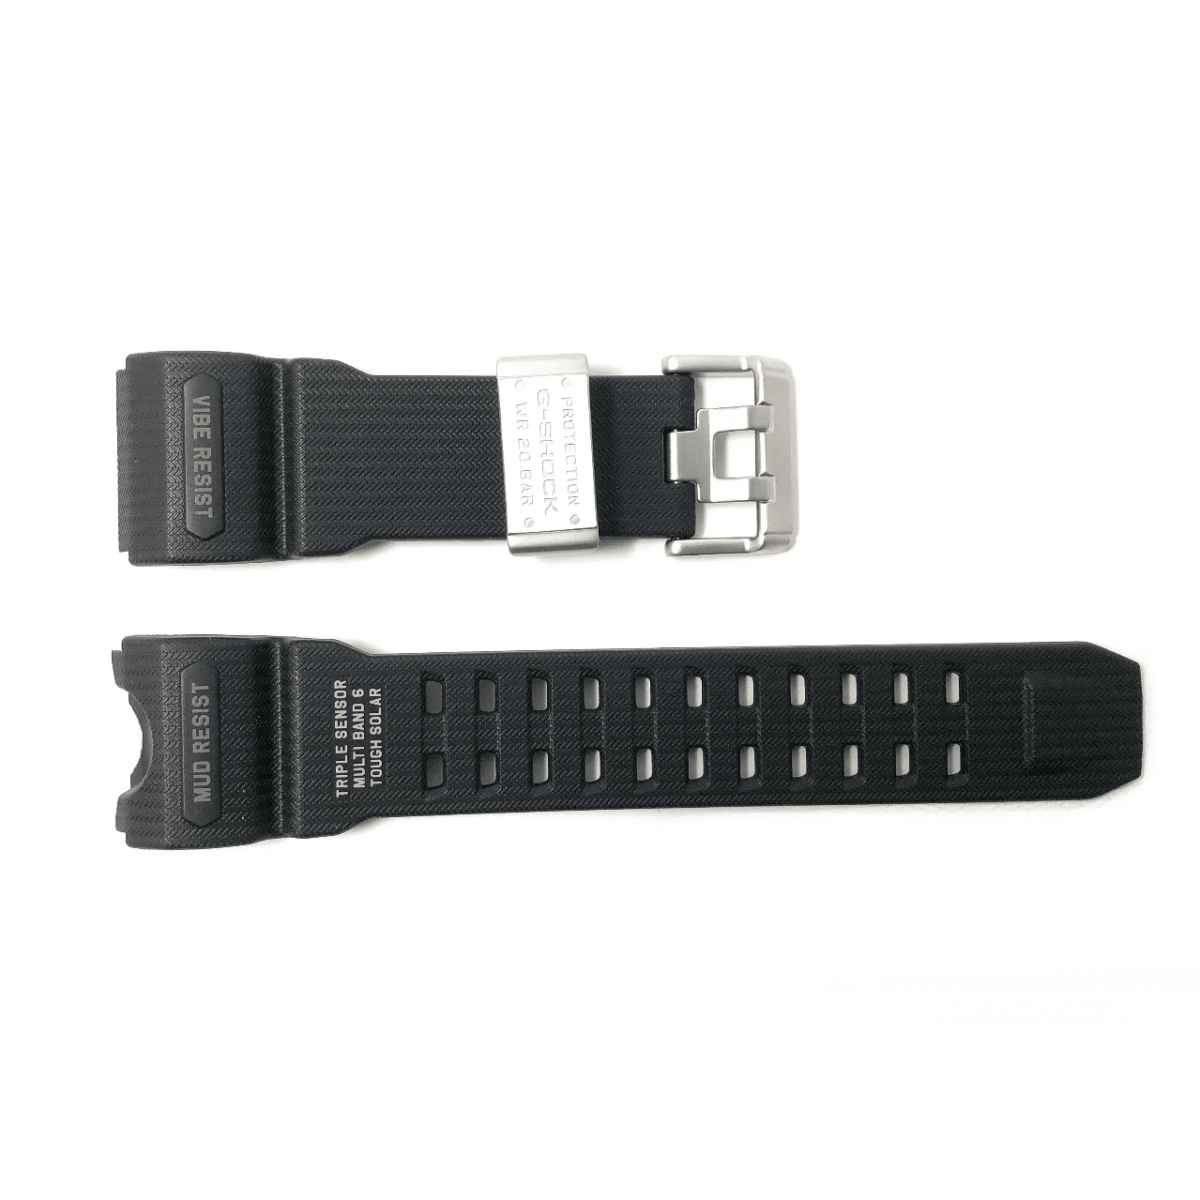 Casio Watch Strap G Shock Genuine Black Replacement 10632705 fits GWG 1000 1A 194509276730 6 - Maddisons UK